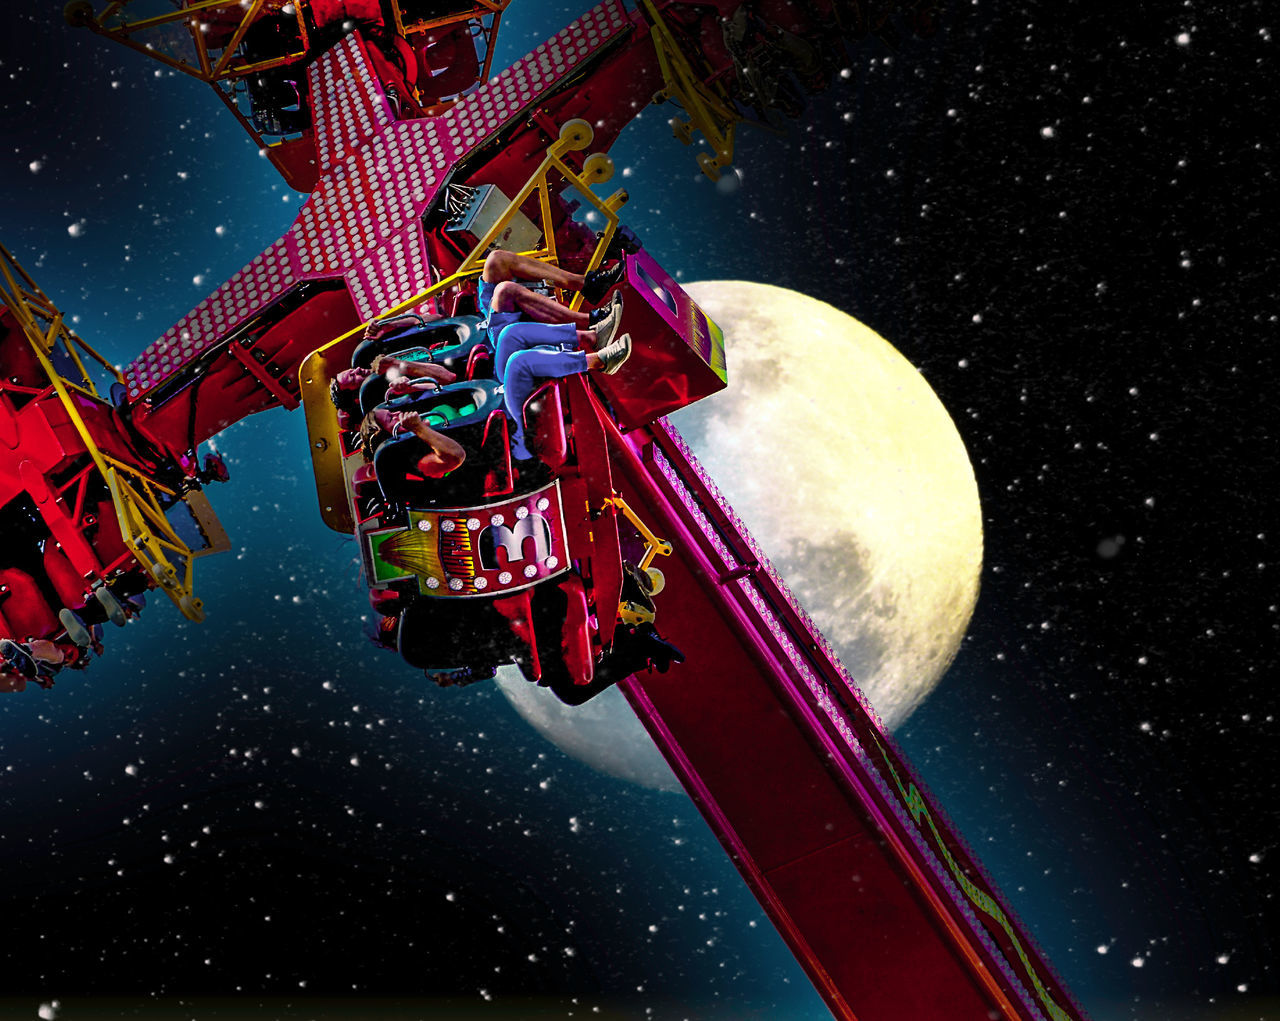 Tilburg Netherland Kermis Night Space Sky Red No People Star - Space Nature Astronomy Outdoors Moon Motion Arts Culture And Entertainment Transportation Celebration Space Exploration Gift Star Music